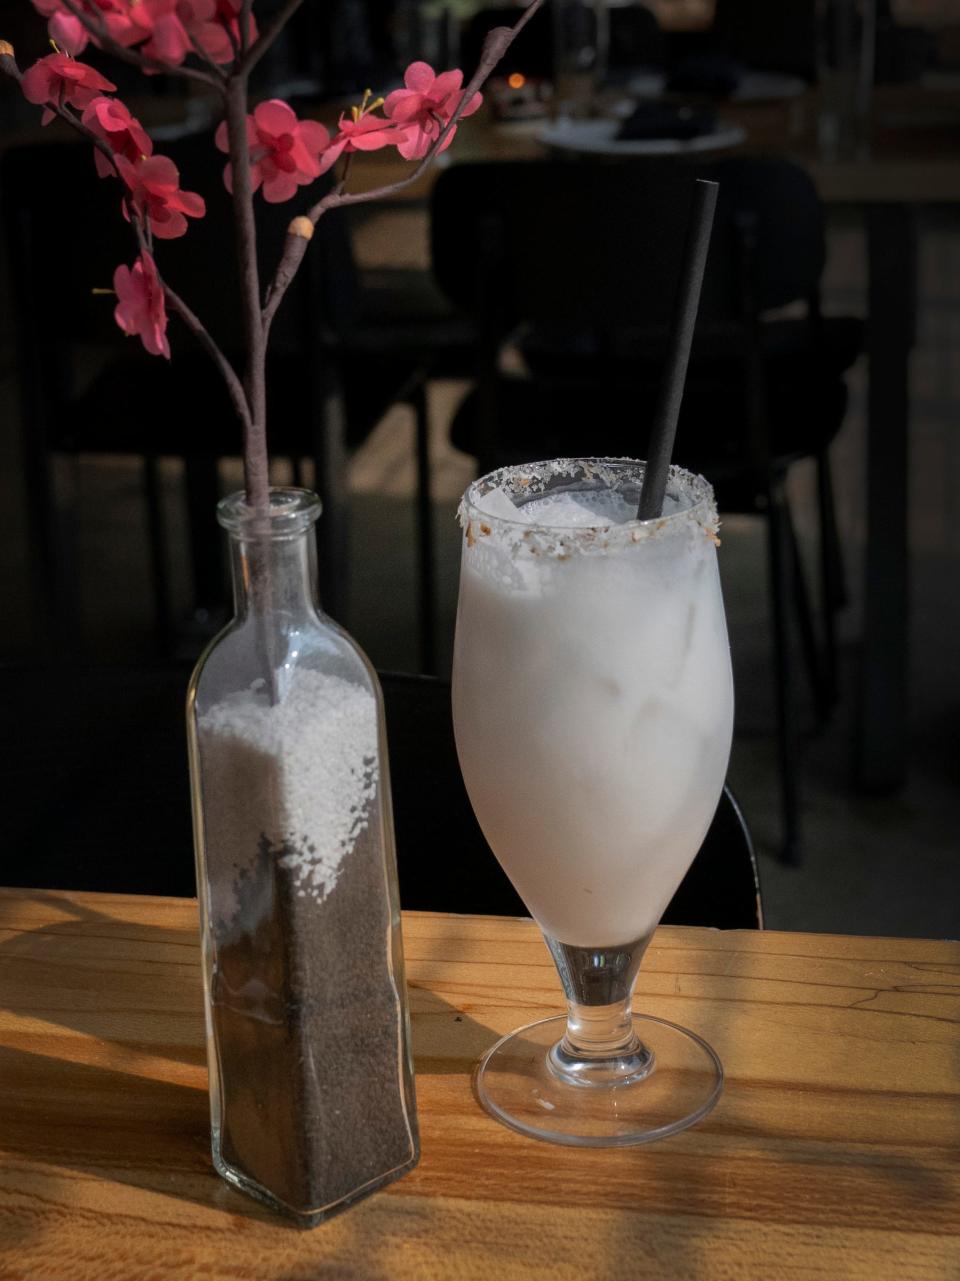 A zero-proof House Coconut Lemongrass Iced Tea is on the menu at Vigilante Kitchen which opened June 30, 2023. This has been the dream of executive chef and owner Aaron Cozadd, who has conceptualized an immersive venue that encompasses Zen vibes, punk rock and graphic novels.